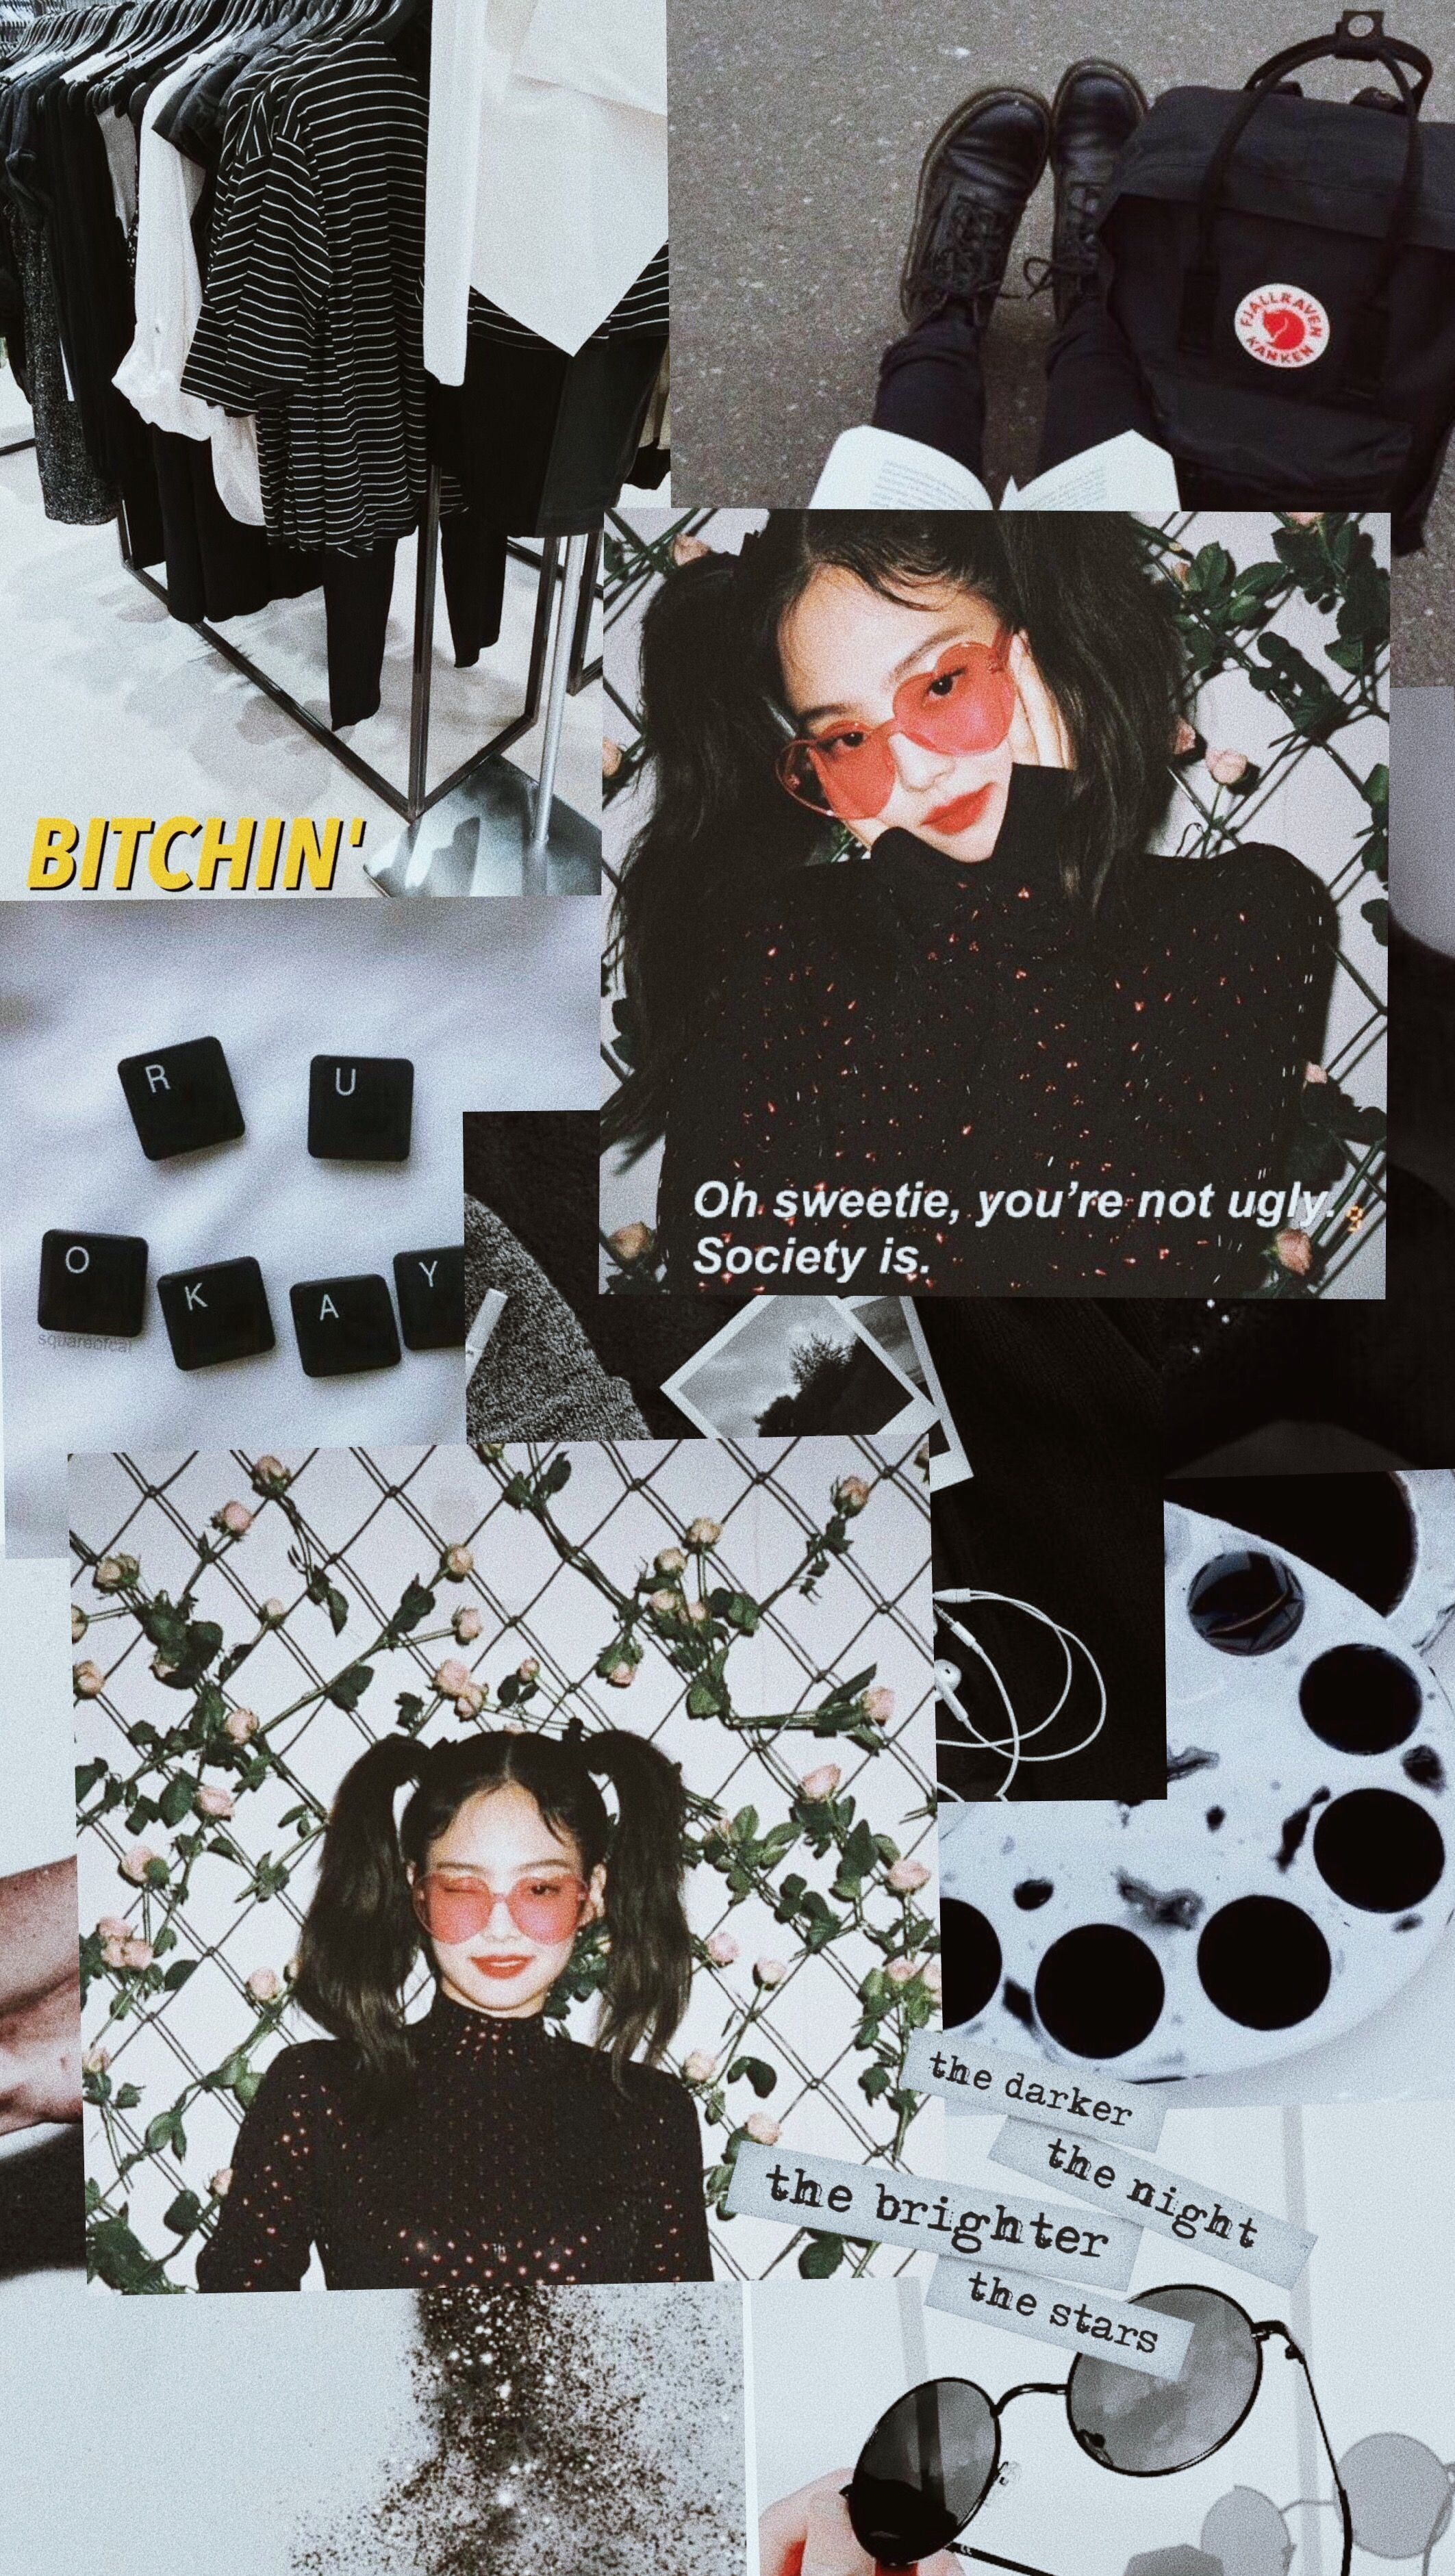 Aesthetic background of a girl with red glasses, a girl with blunt bangs, a keyboard, and a quote - Jennie